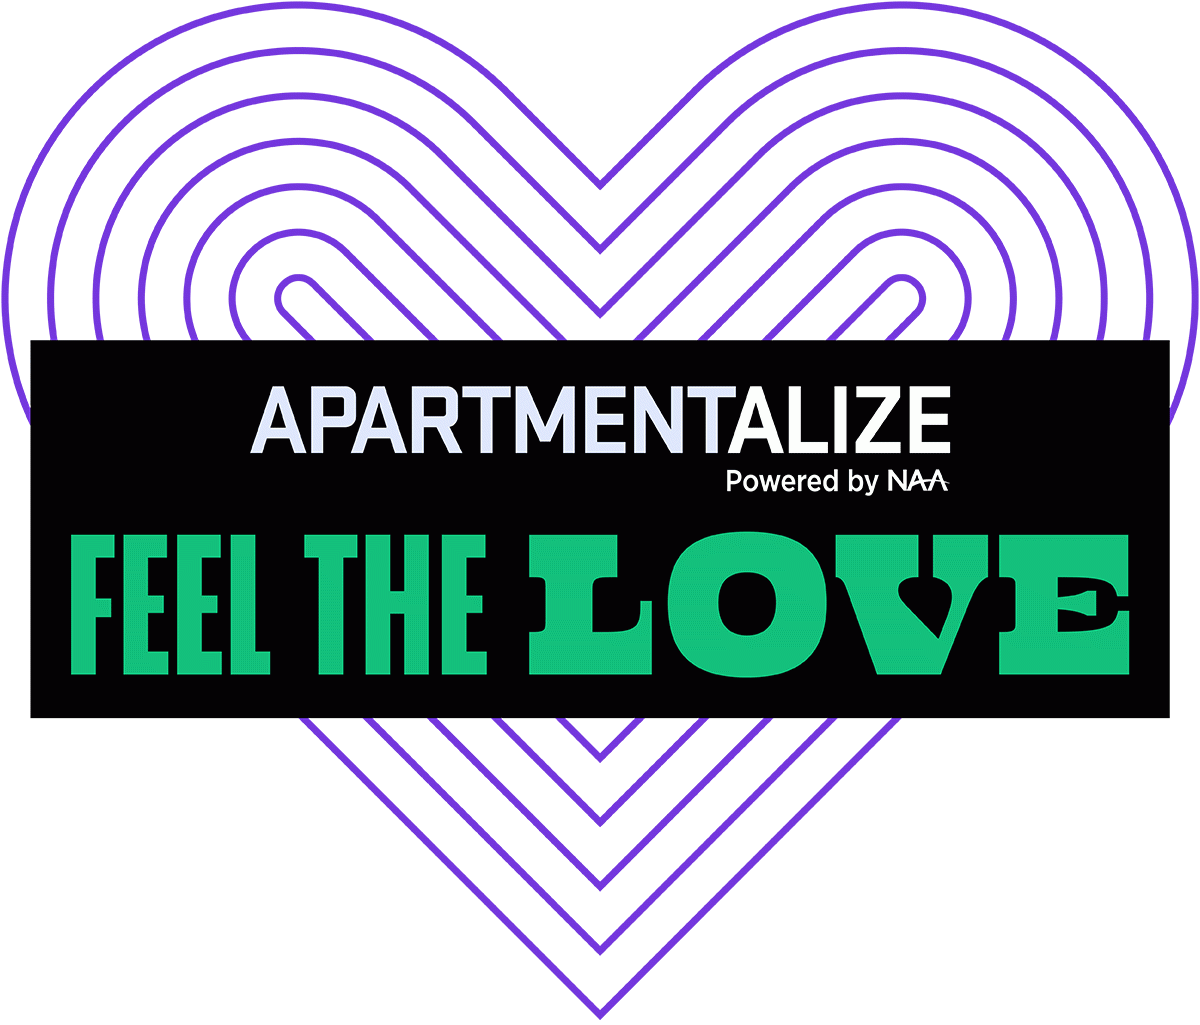 apartmentalize gif saying "feel the love"